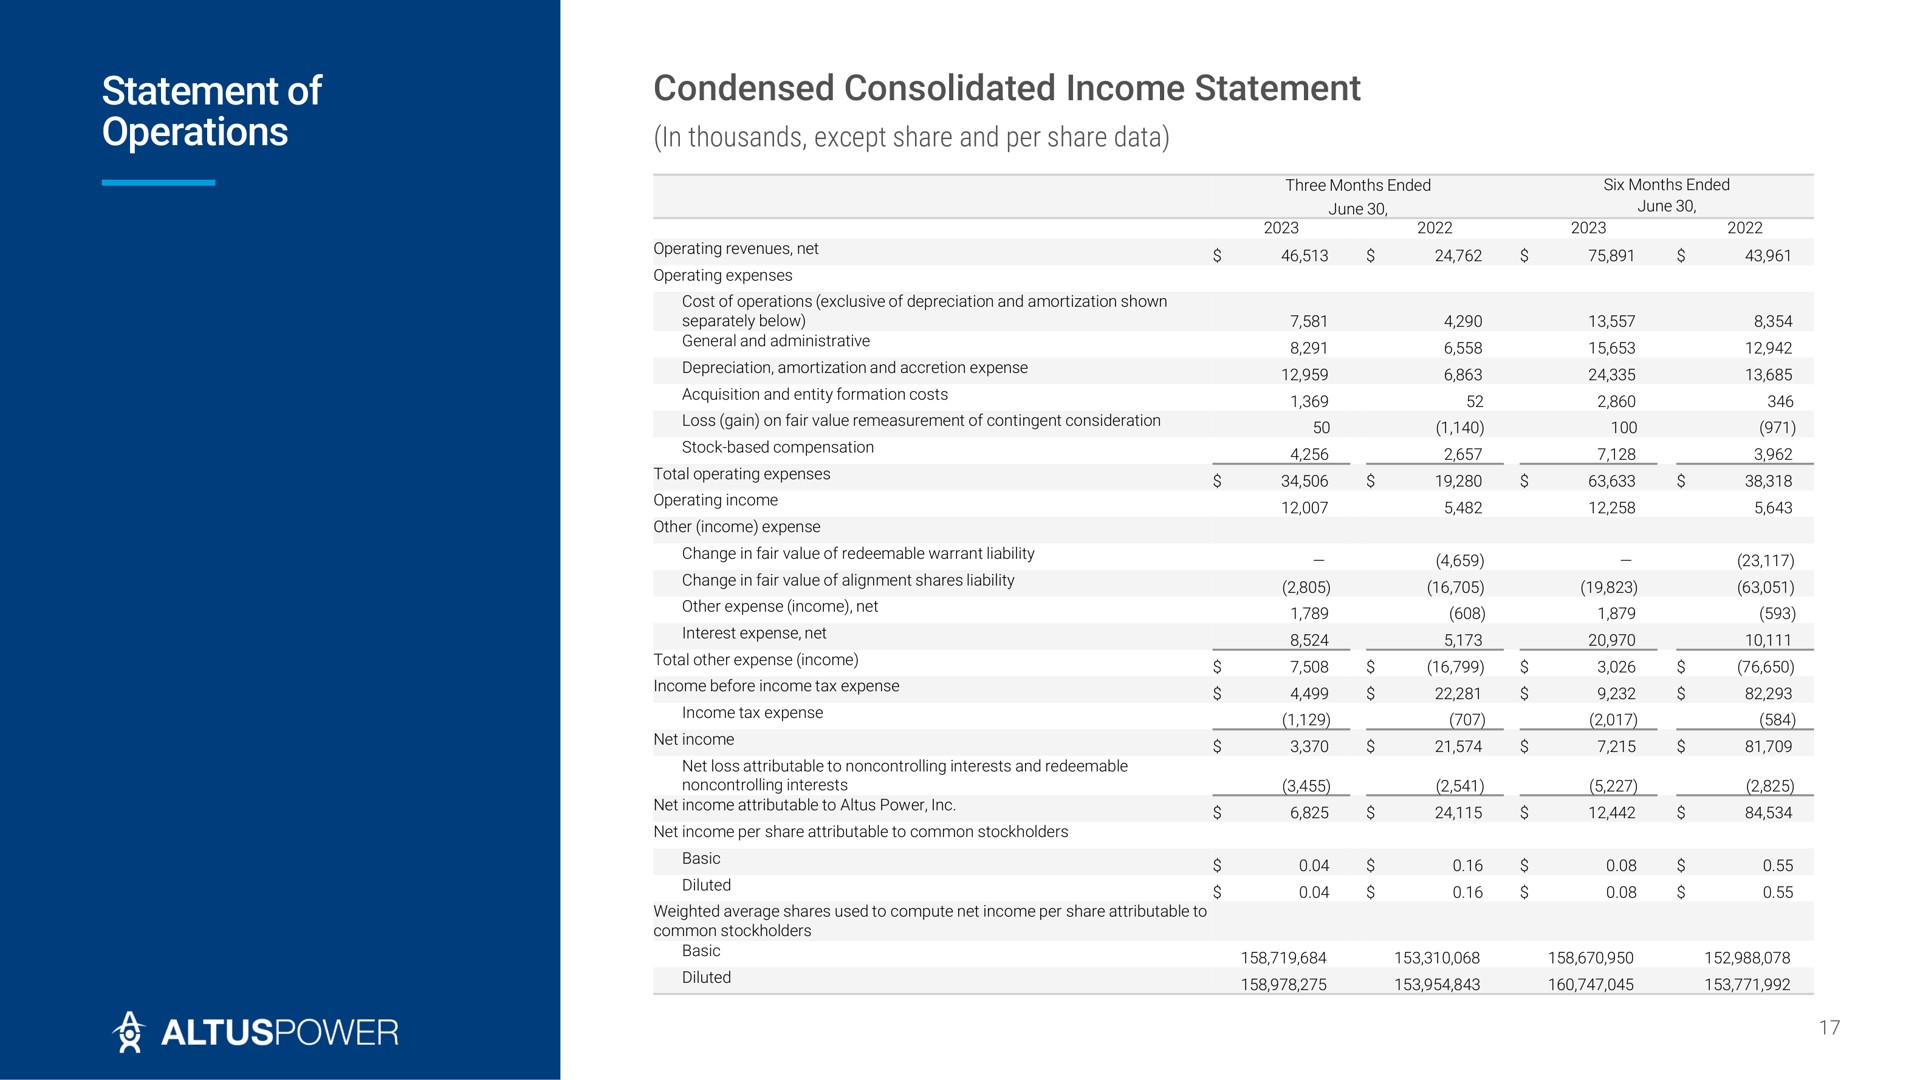 statement of operations condensed consolidated income statement | Altus Power